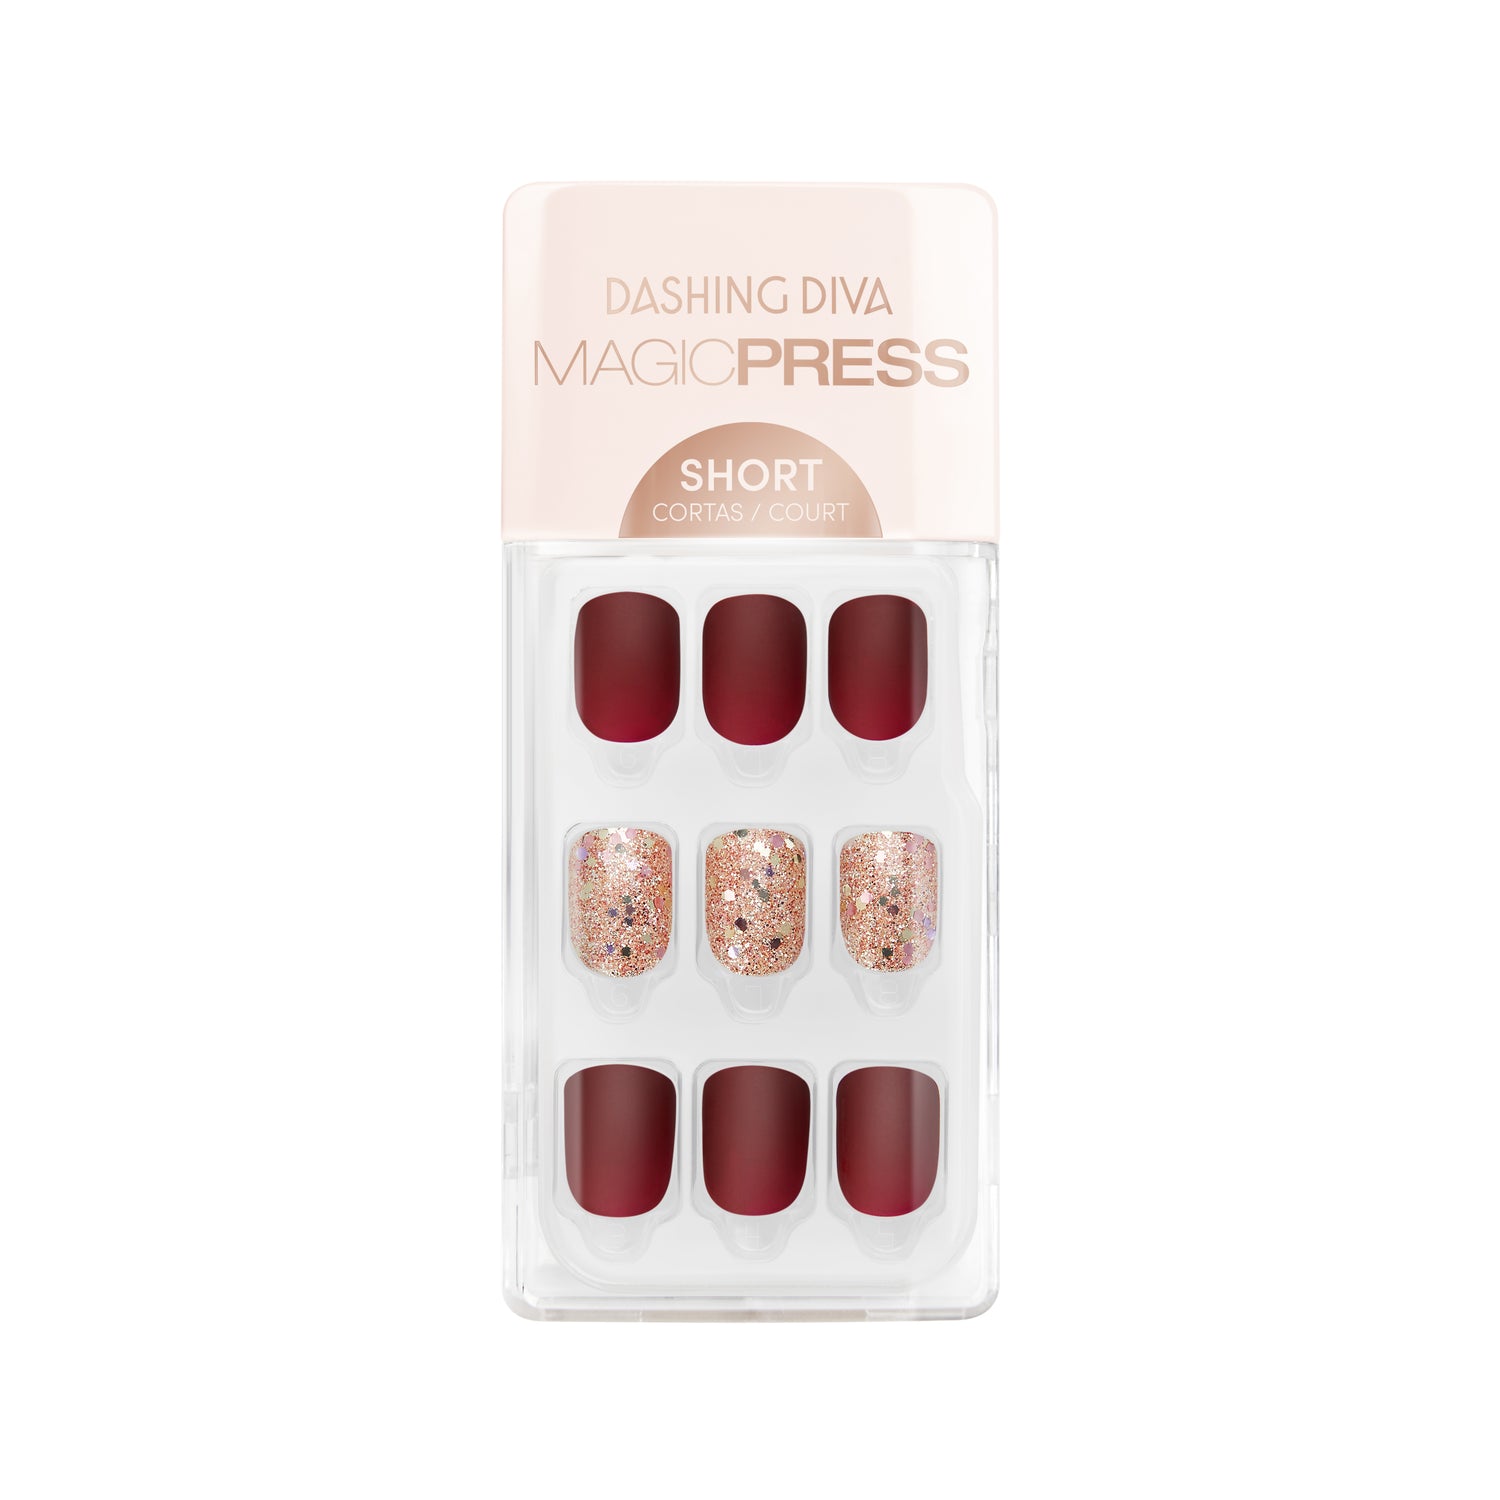 Dashing Diva MAGIC PRESS short, square deep red matte finish press on gel nails with chunky gold glitter accents.